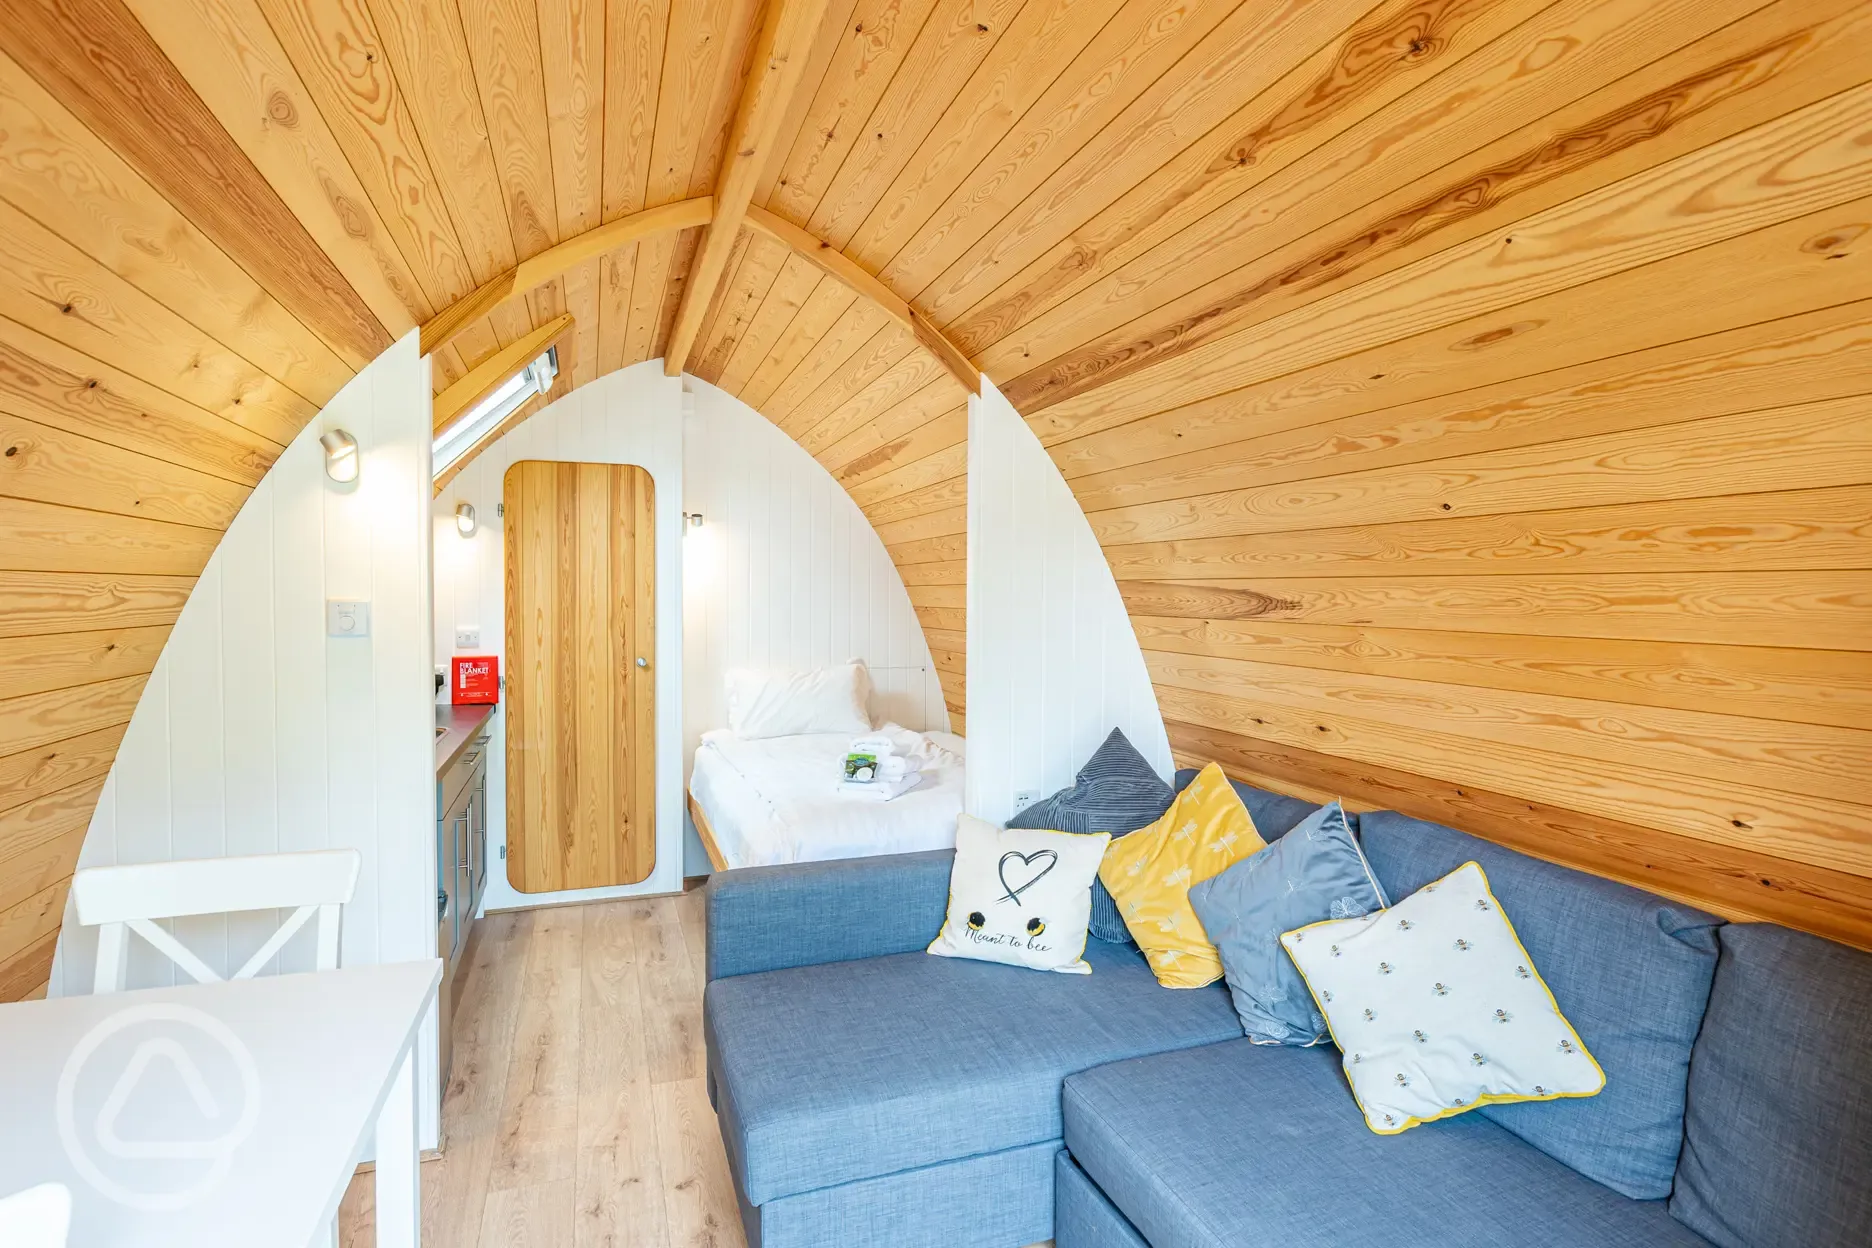 Adult only glamping pod sofa